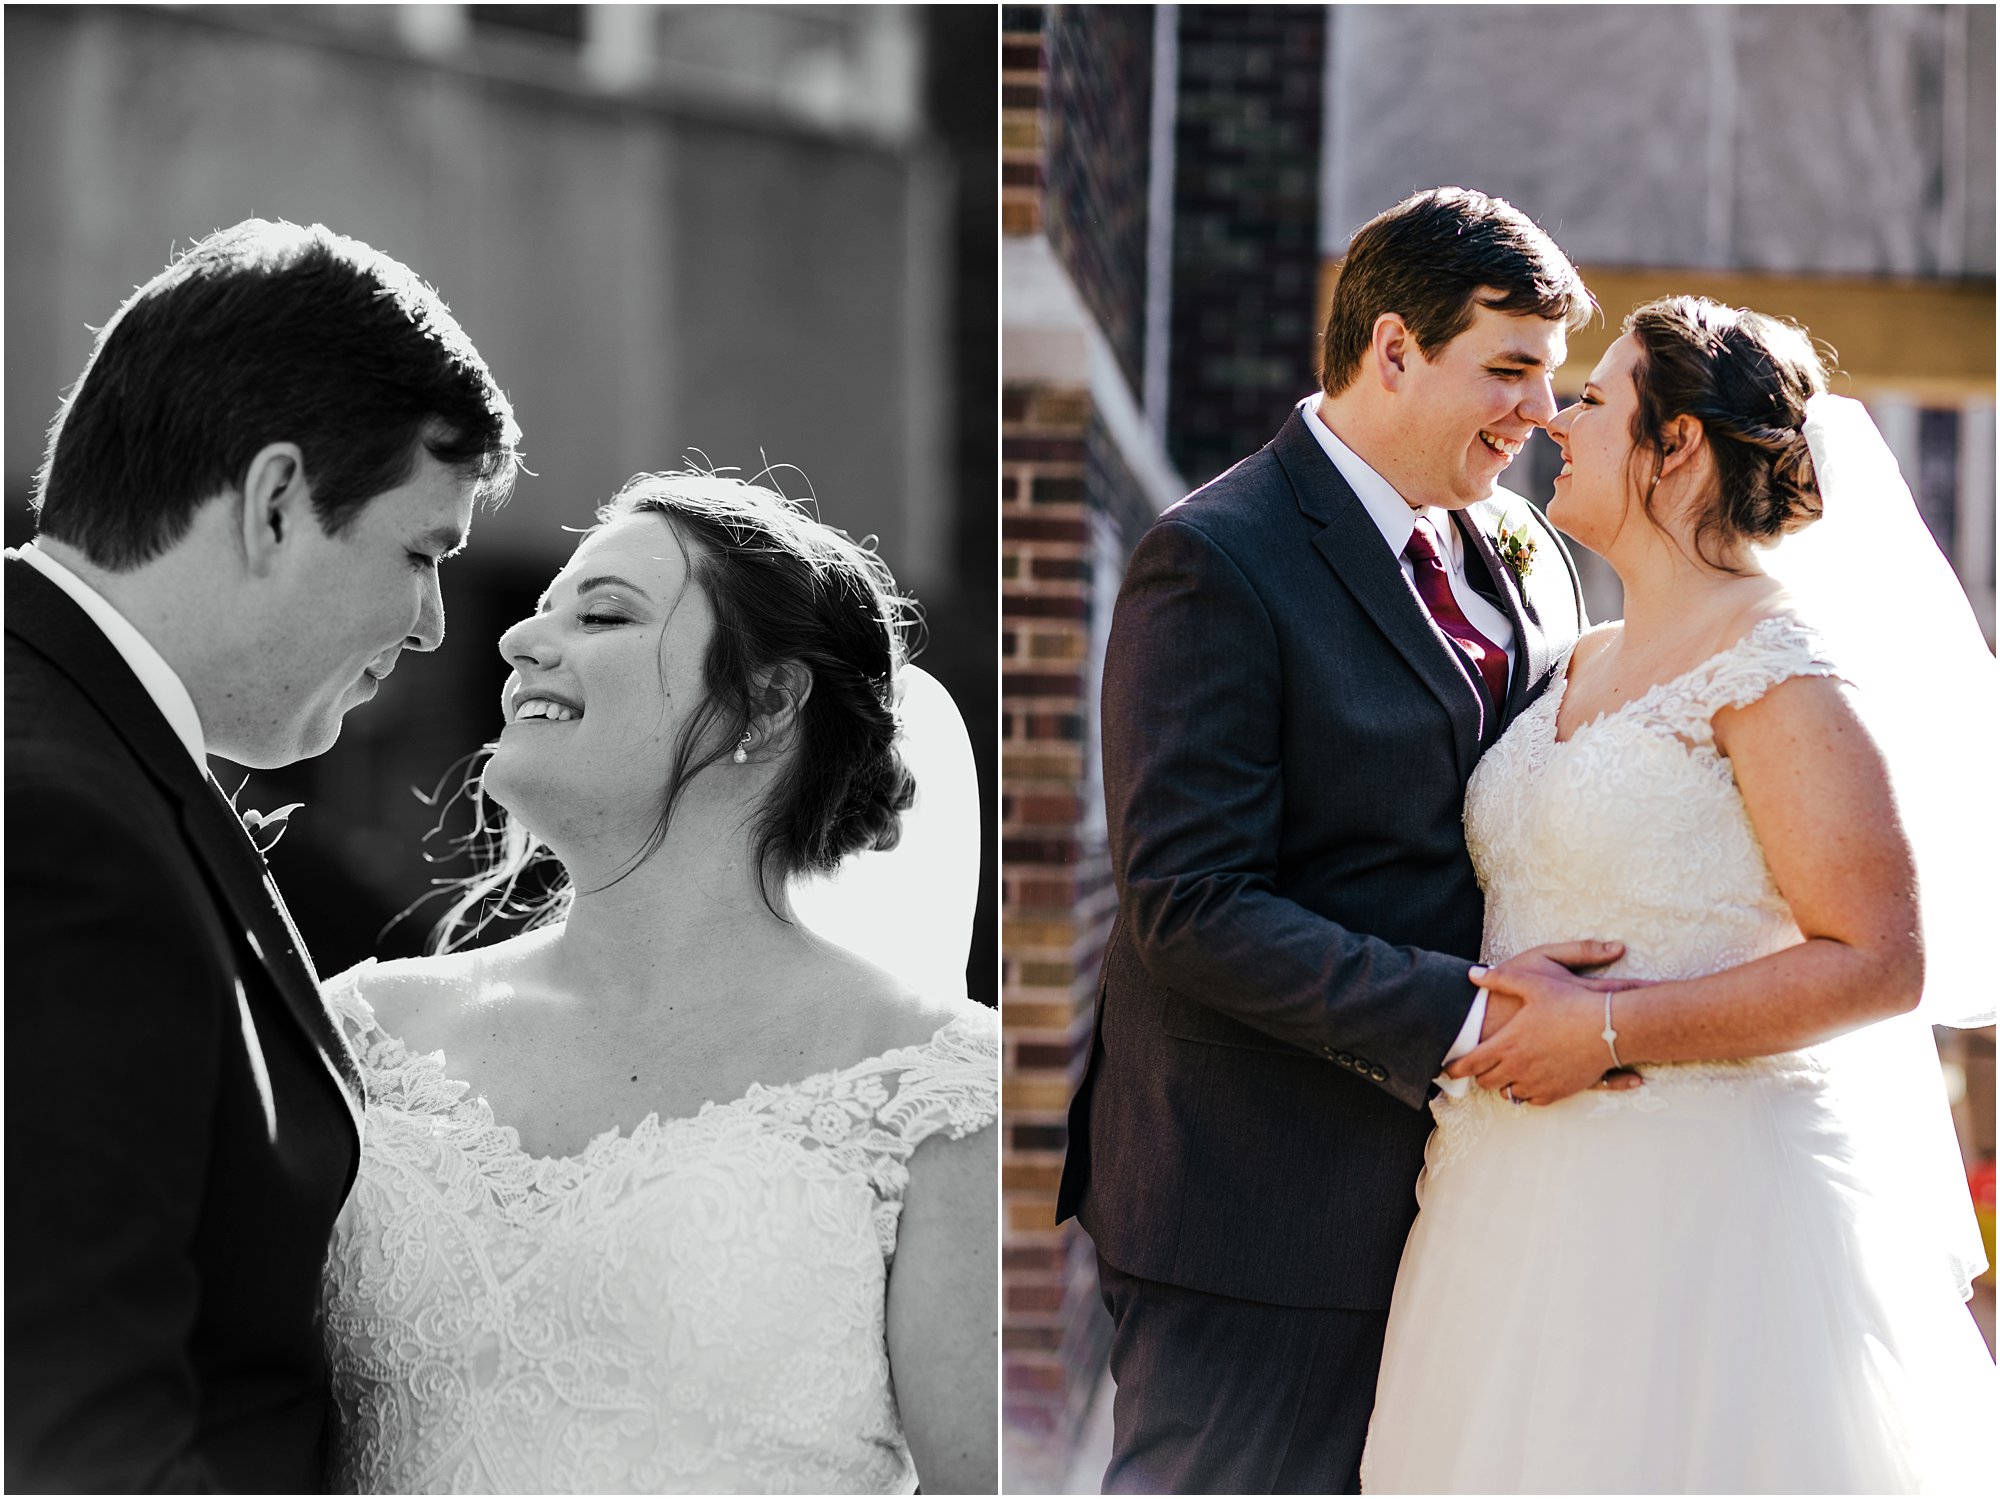 Giddy wedding couple embracing and laughing together outside of St. Luke's church in Memphis, Tn